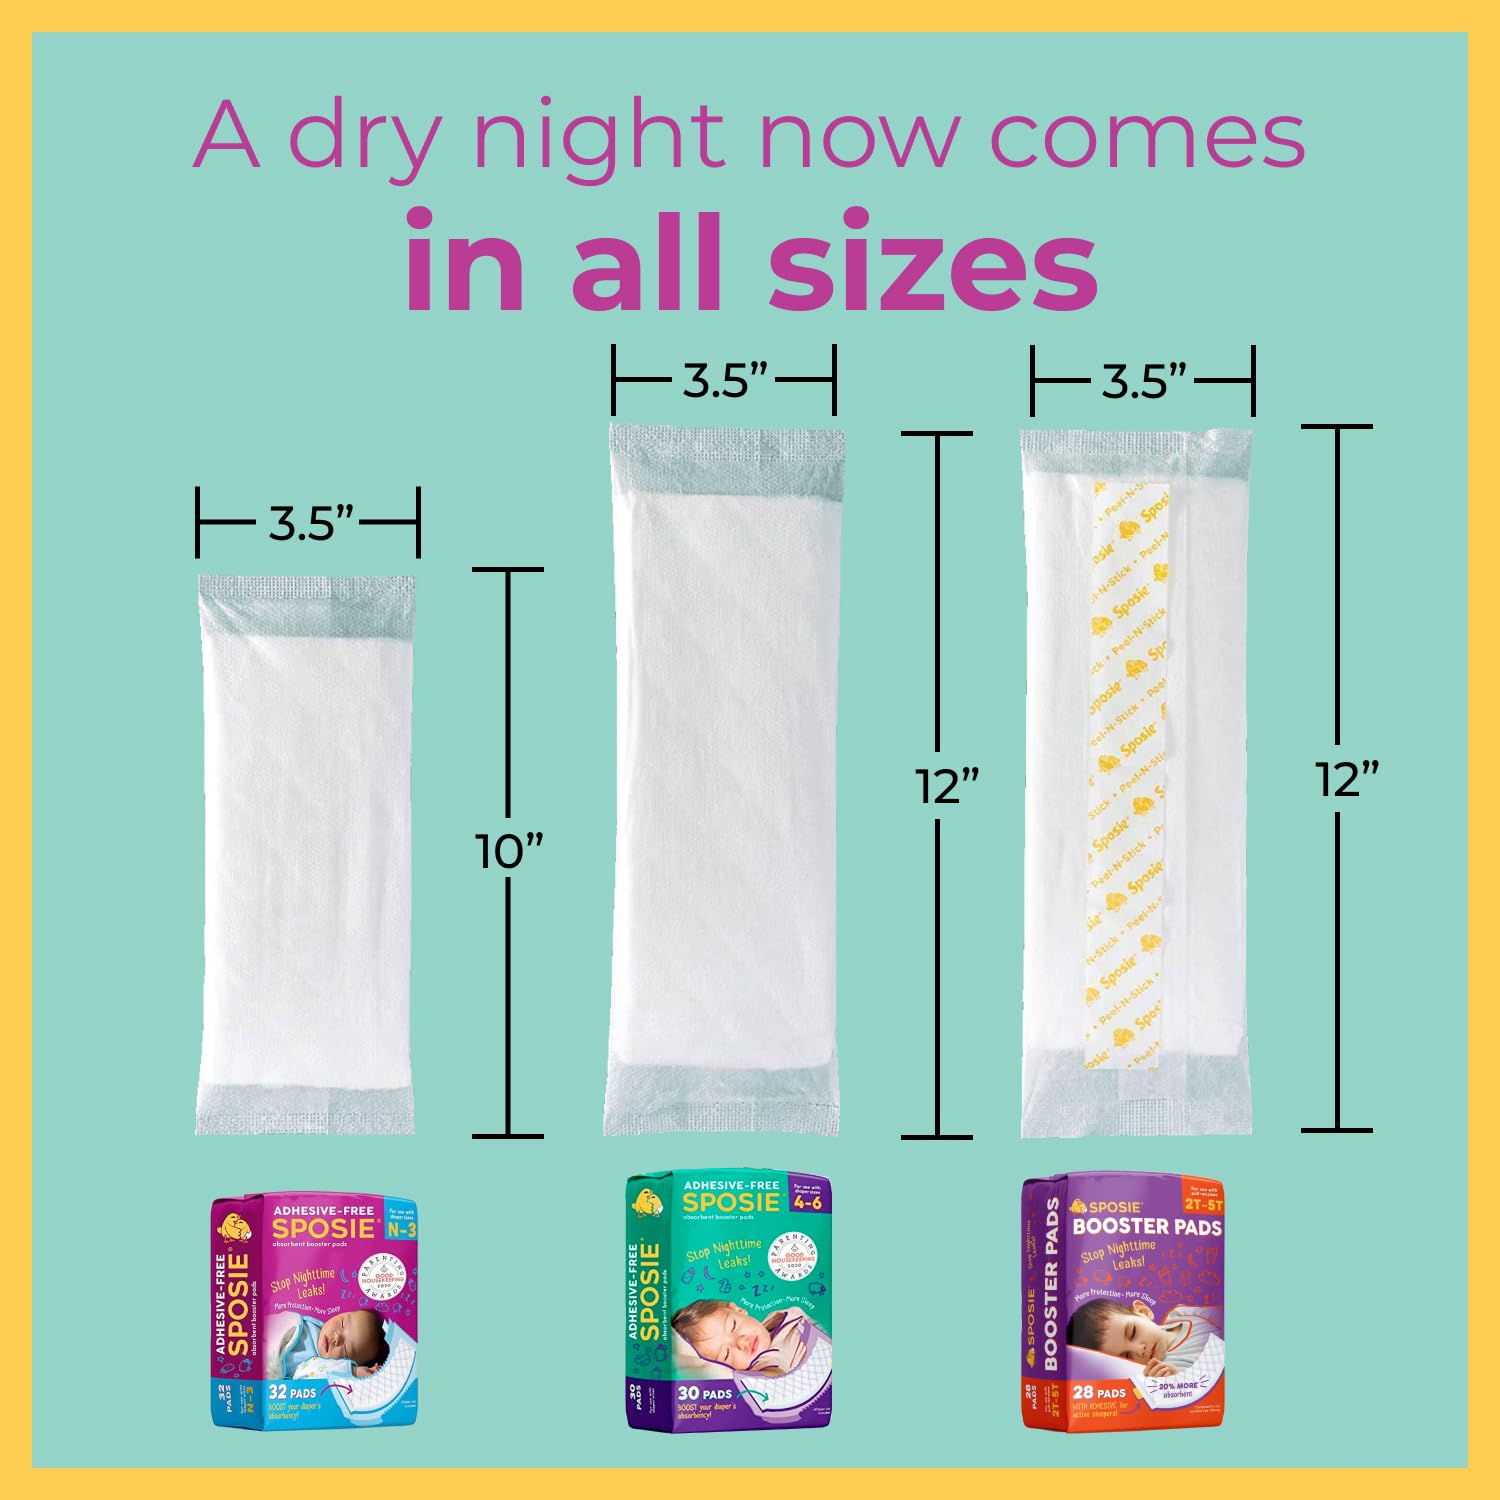 Sposie Diaper Booster Pads with Adhesive for Active Sleepers, Stop Overnight Diaper Leaks, Reduce Nighttime Diaper Changes, for Diaper Sizes 4, 5, 6, 2T-5T, 84 ct.